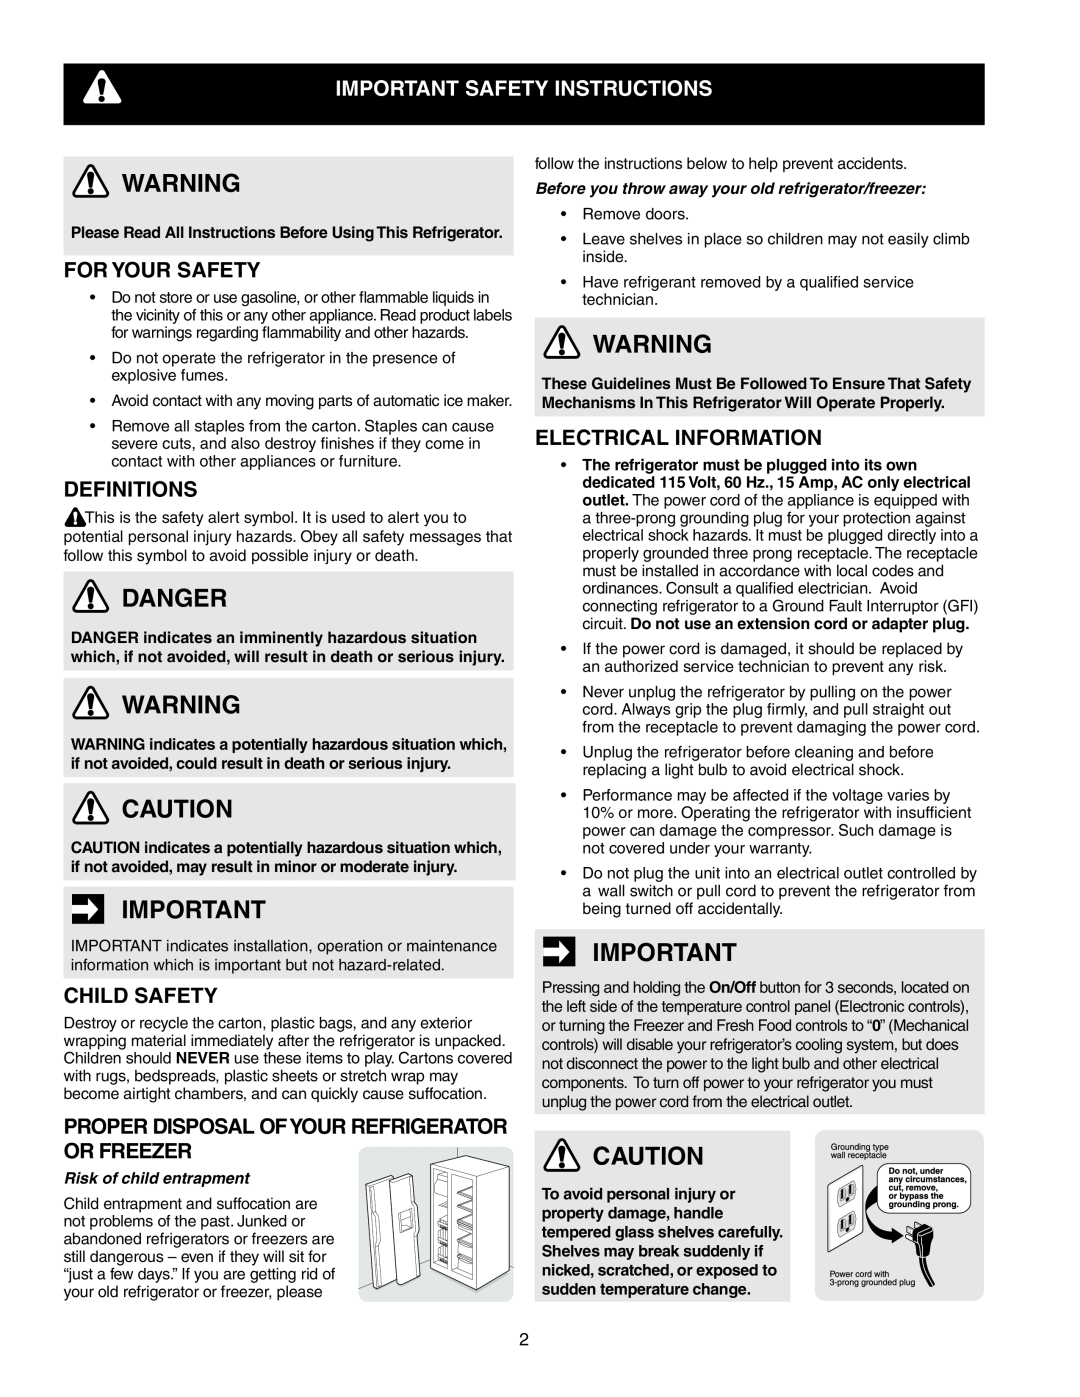 Frigidaire 241856001 Danger, Important Safety Instructions, For Your Safety, Definitions, Electrical information 